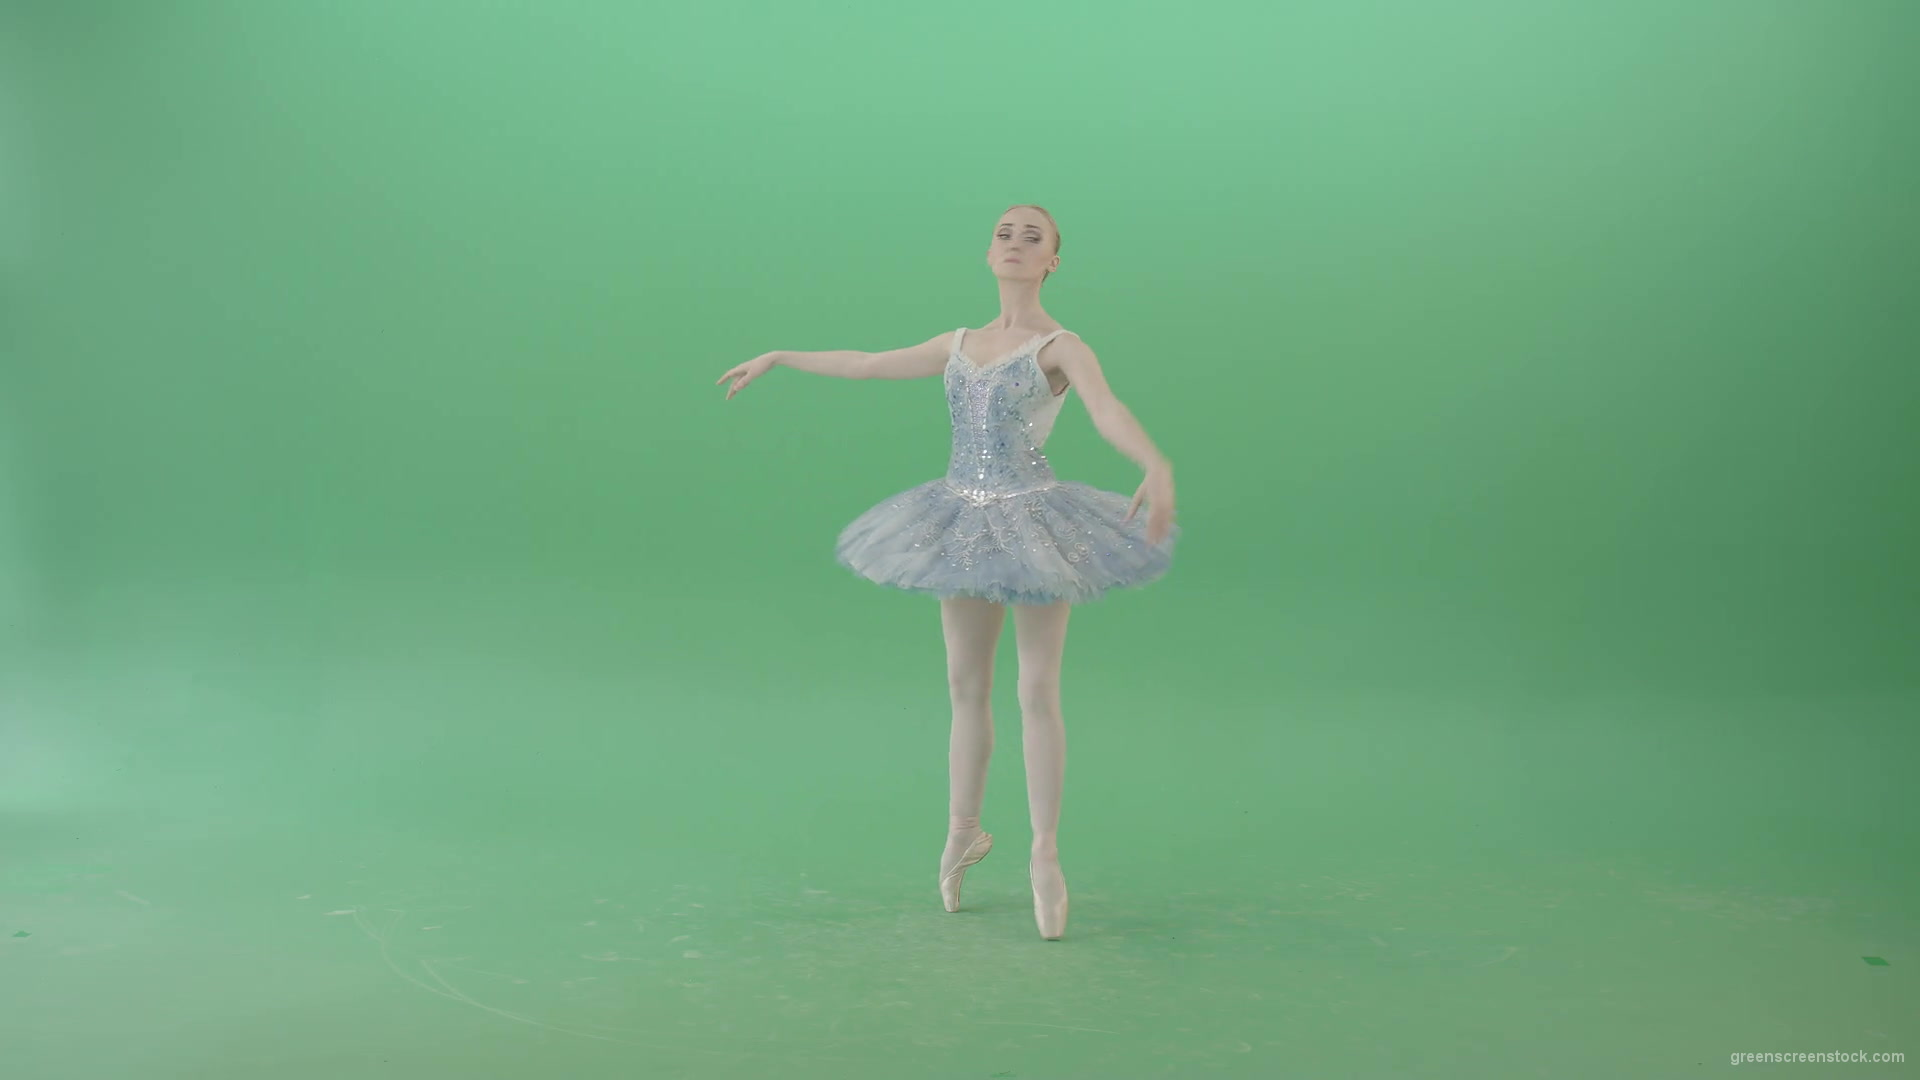 Christmas-story-baller-dancing-girl-in-blue-ballerin-dress-performing-isolated-on-green-screen-4K-Video-Footage-1920_004 Green Screen Stock